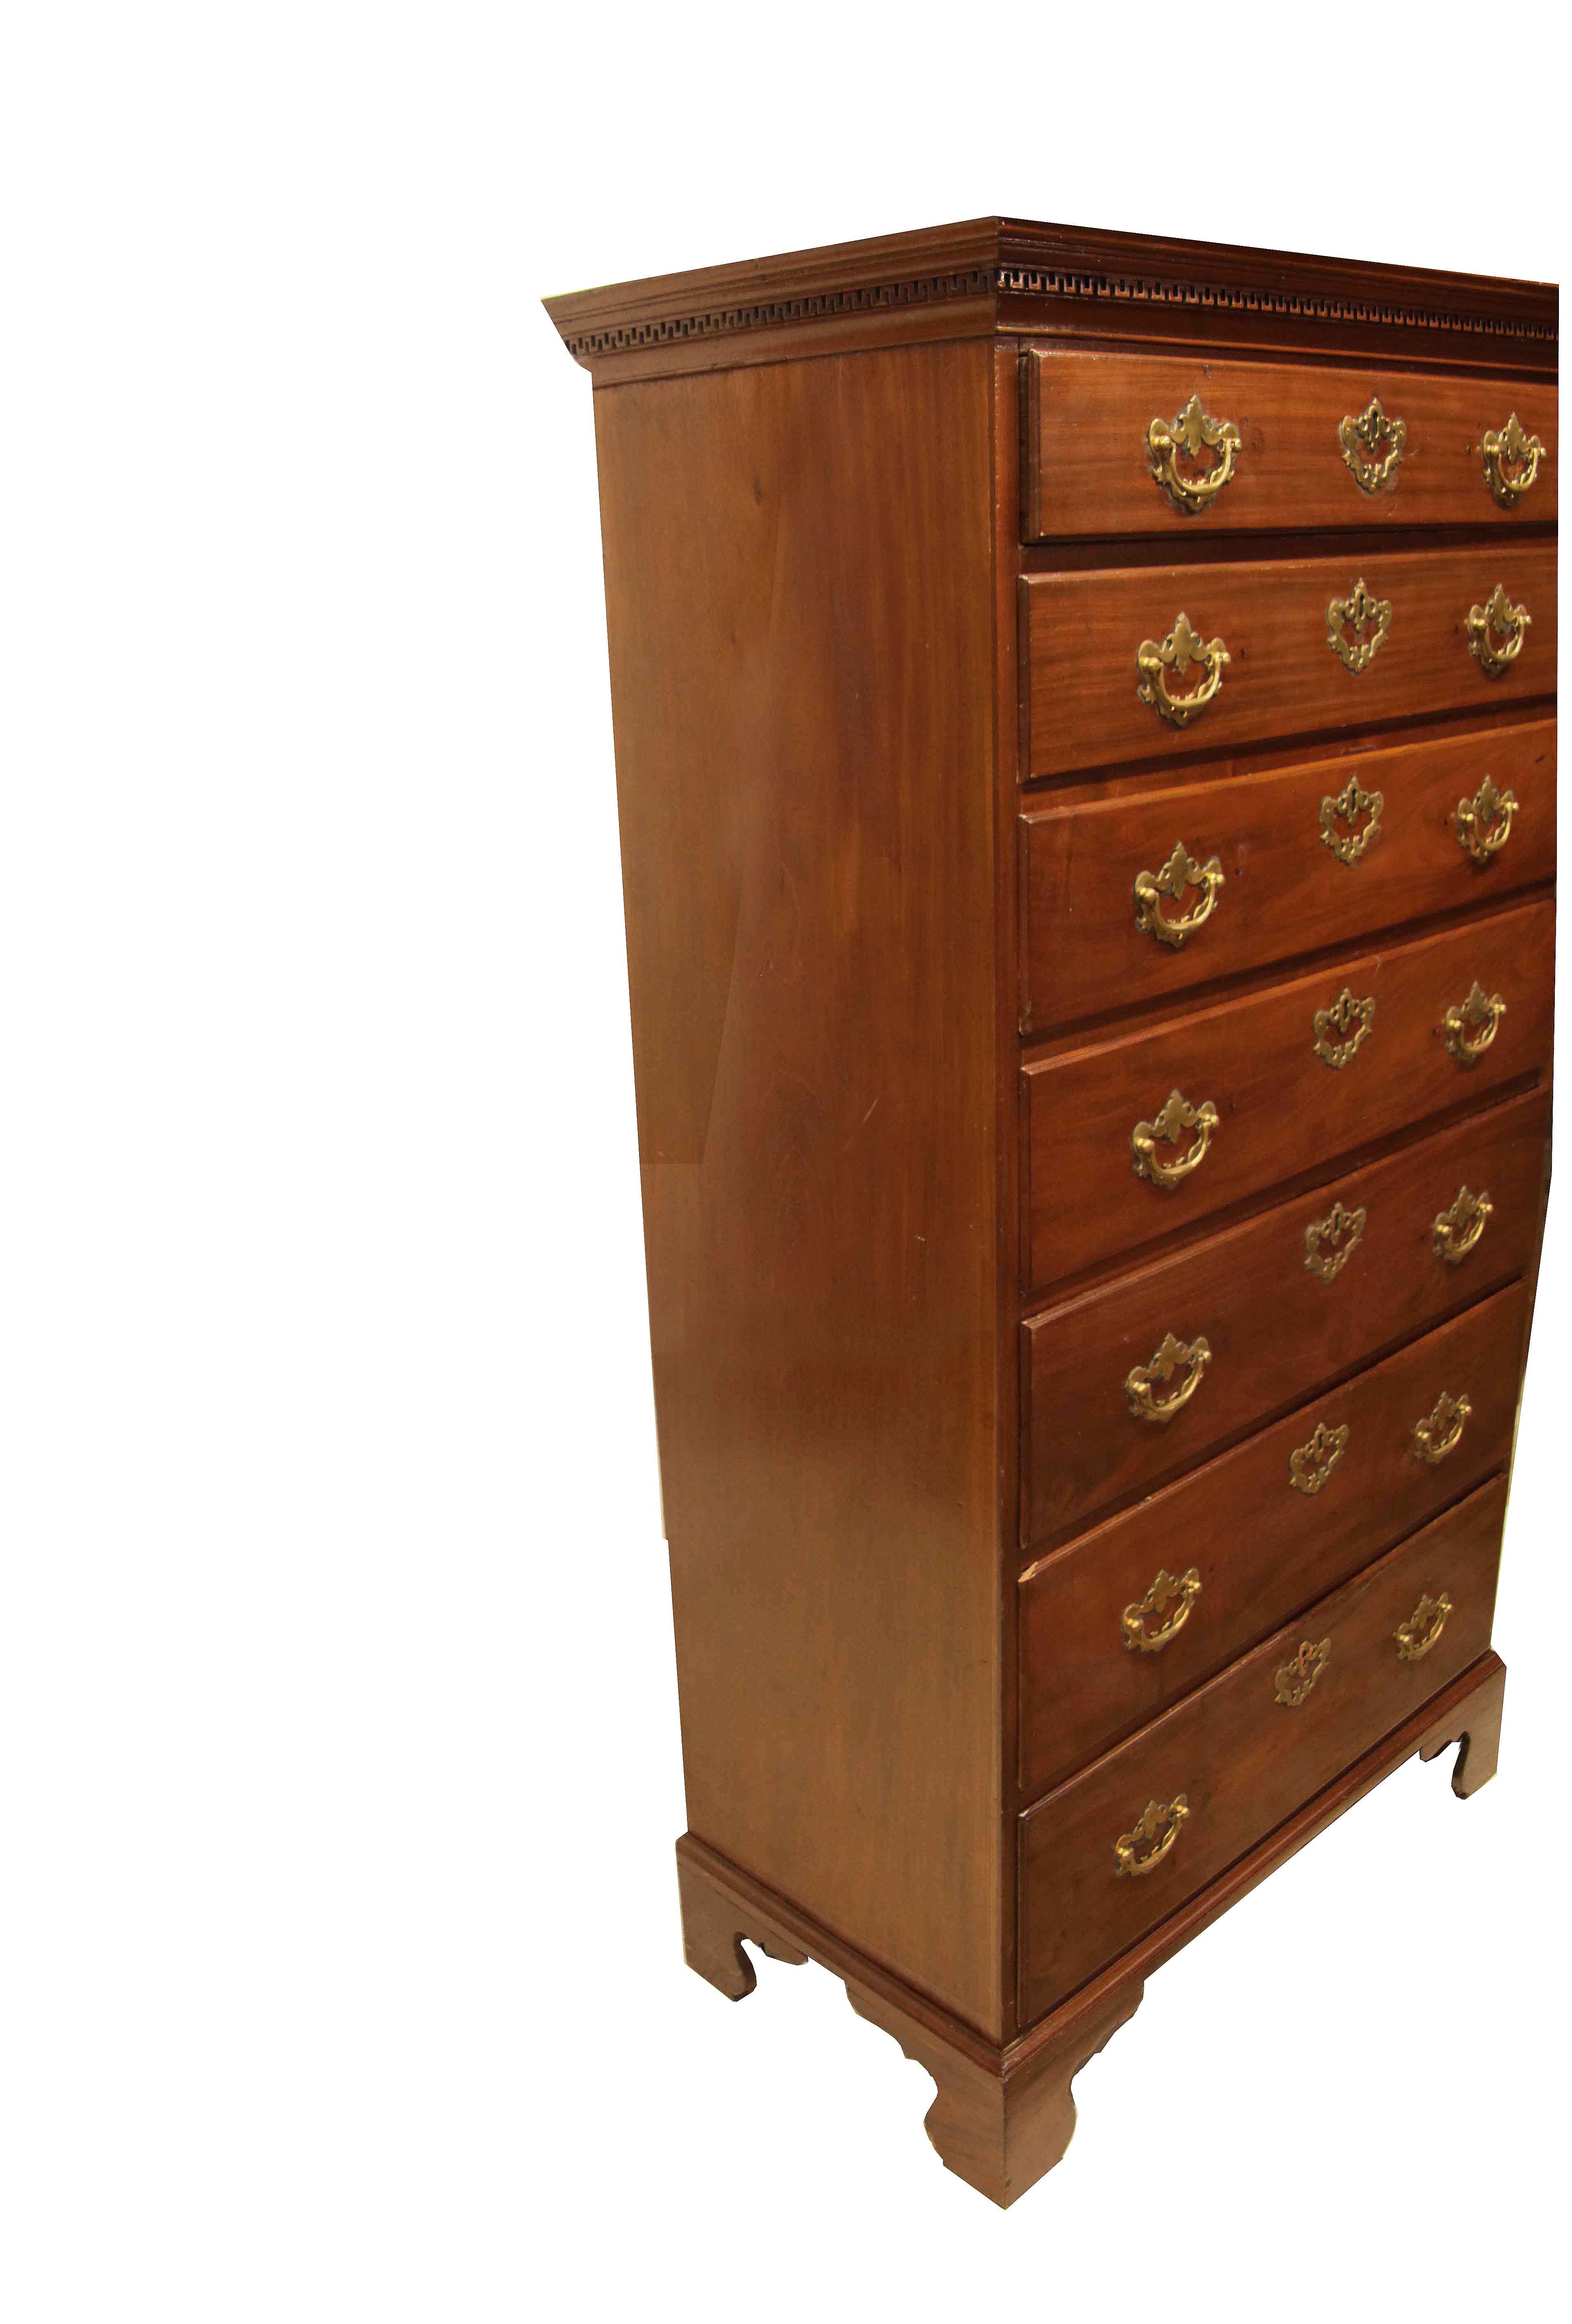 George III tall mahogany chest, with the original cove cornice featuring ''wall of Troy'' dentil molding, this above the seven graduated drawers with overlapping edges and oak secondary wood, the brass pulls and escutcheons are hand made in England